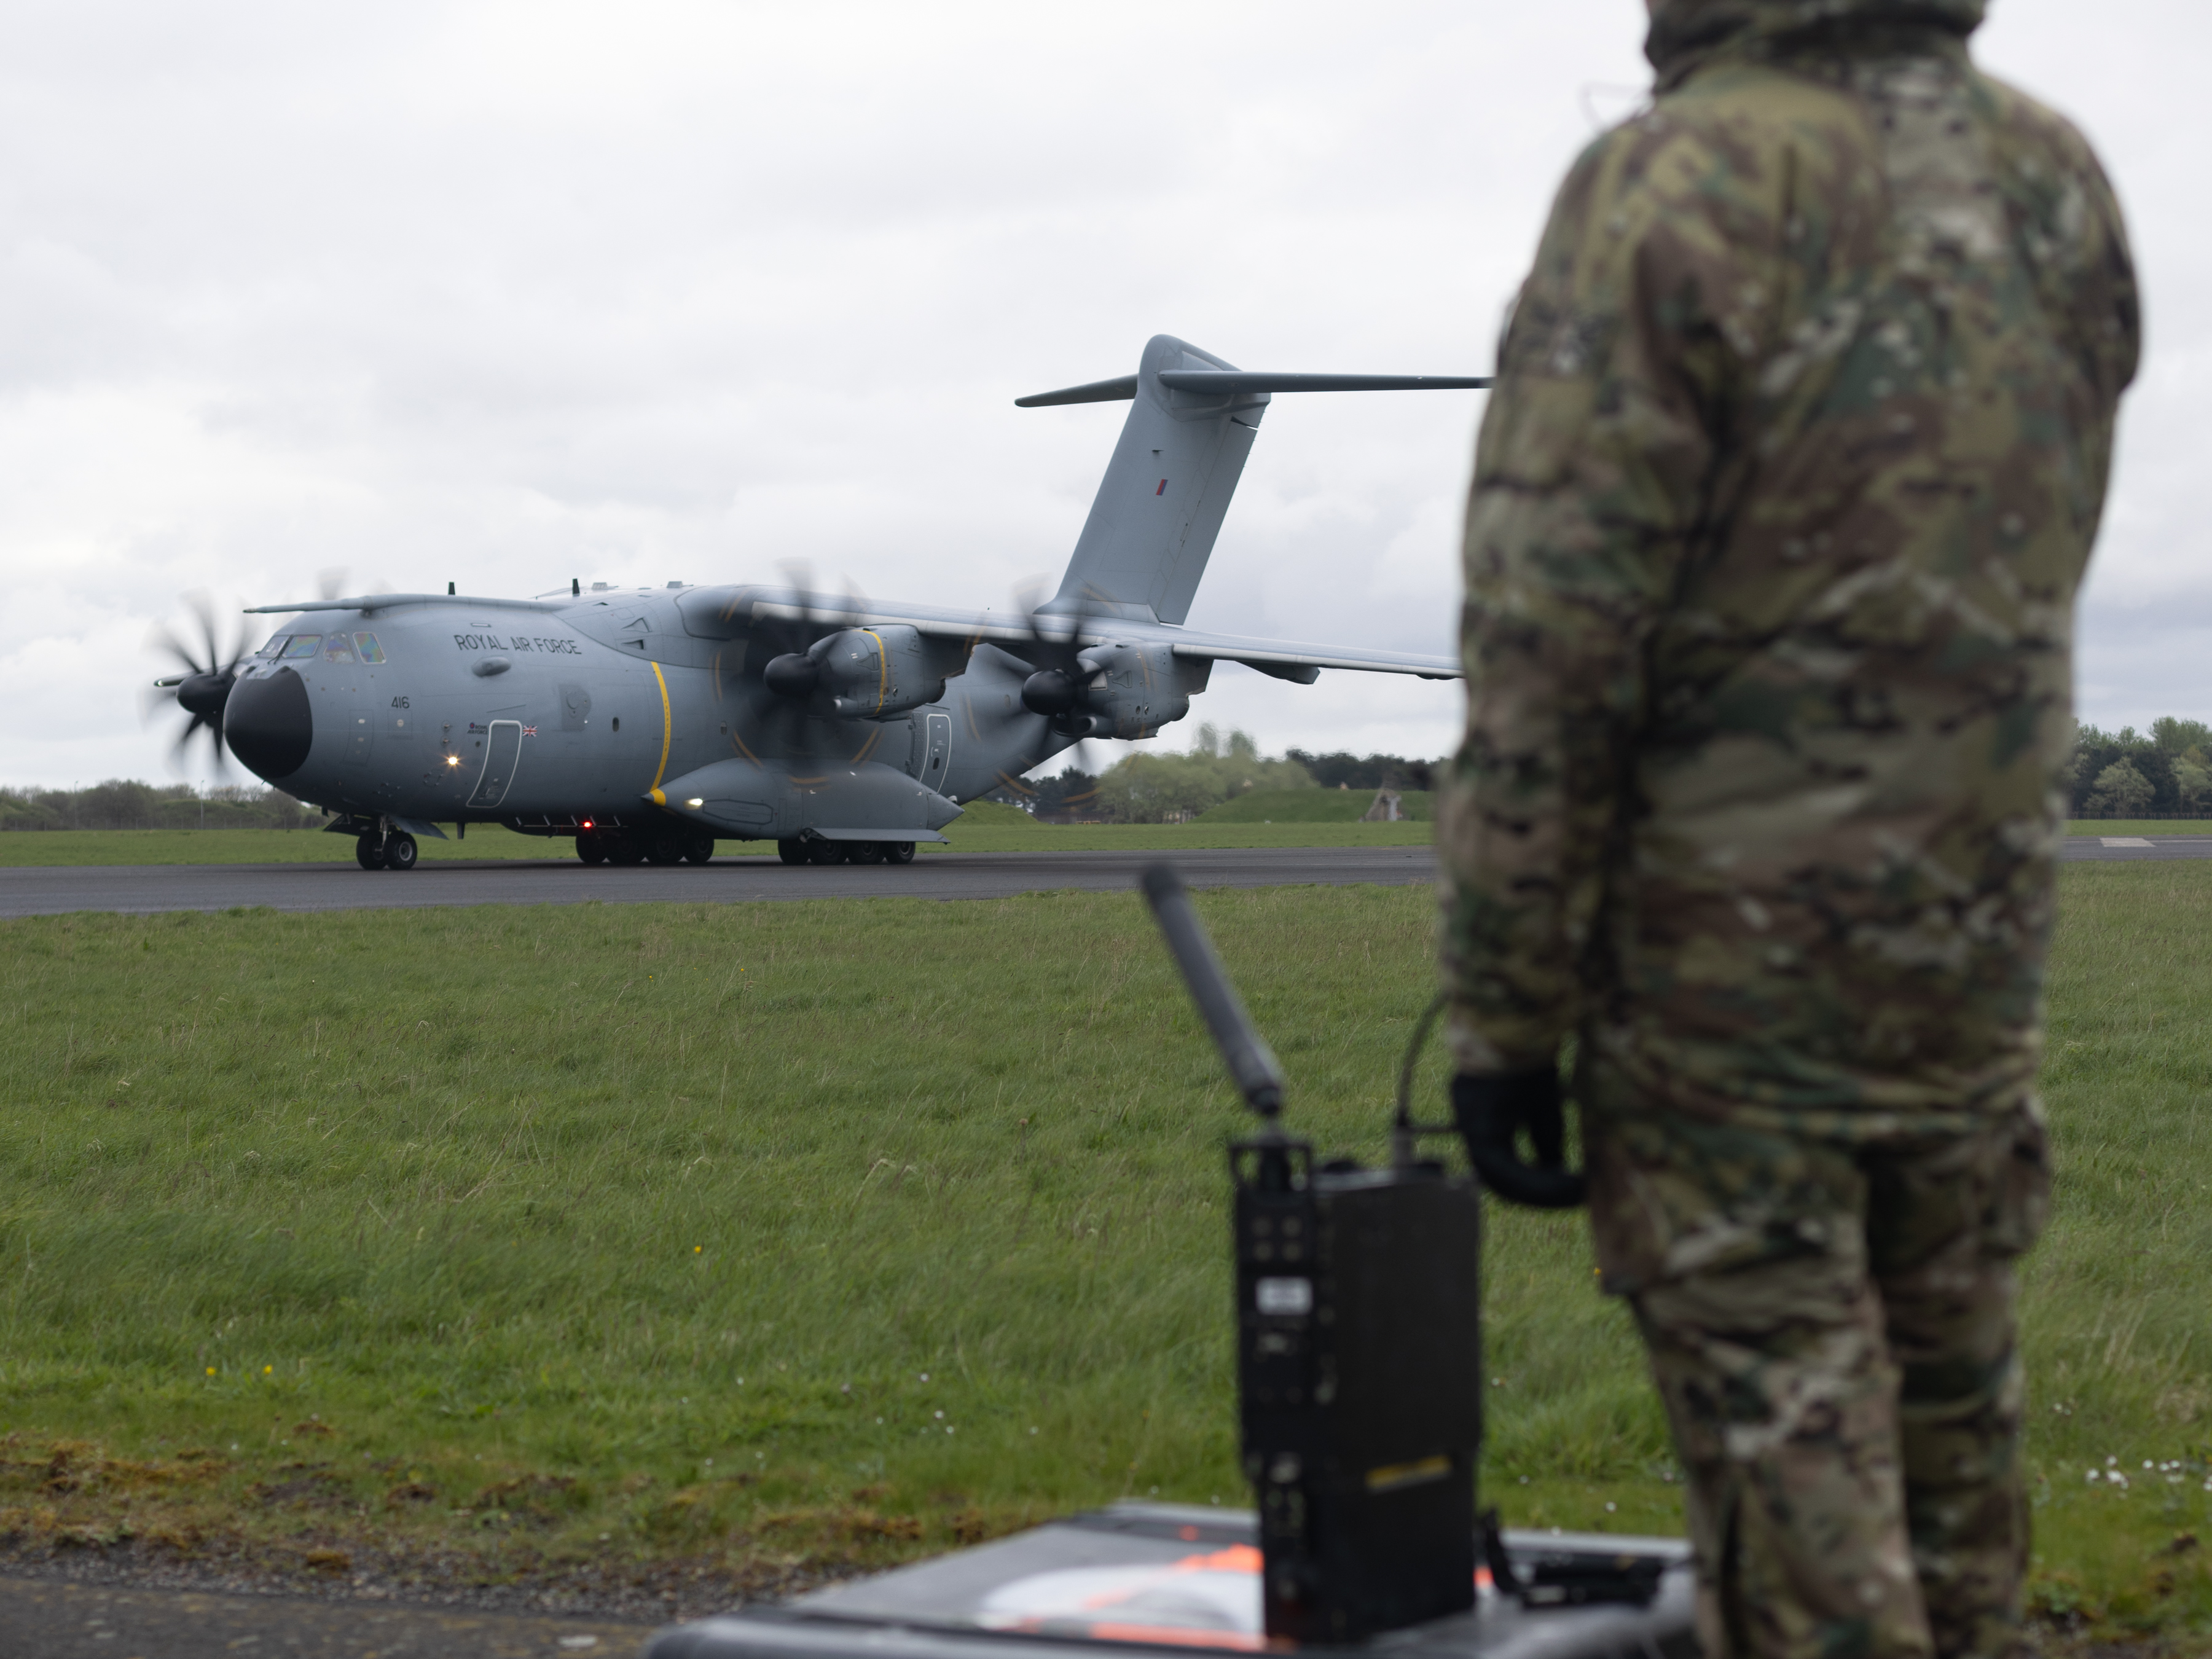 Photo: Tactical Air Traffic Control operative watches an Atlas C Mk.1 aircraft taxiing by.